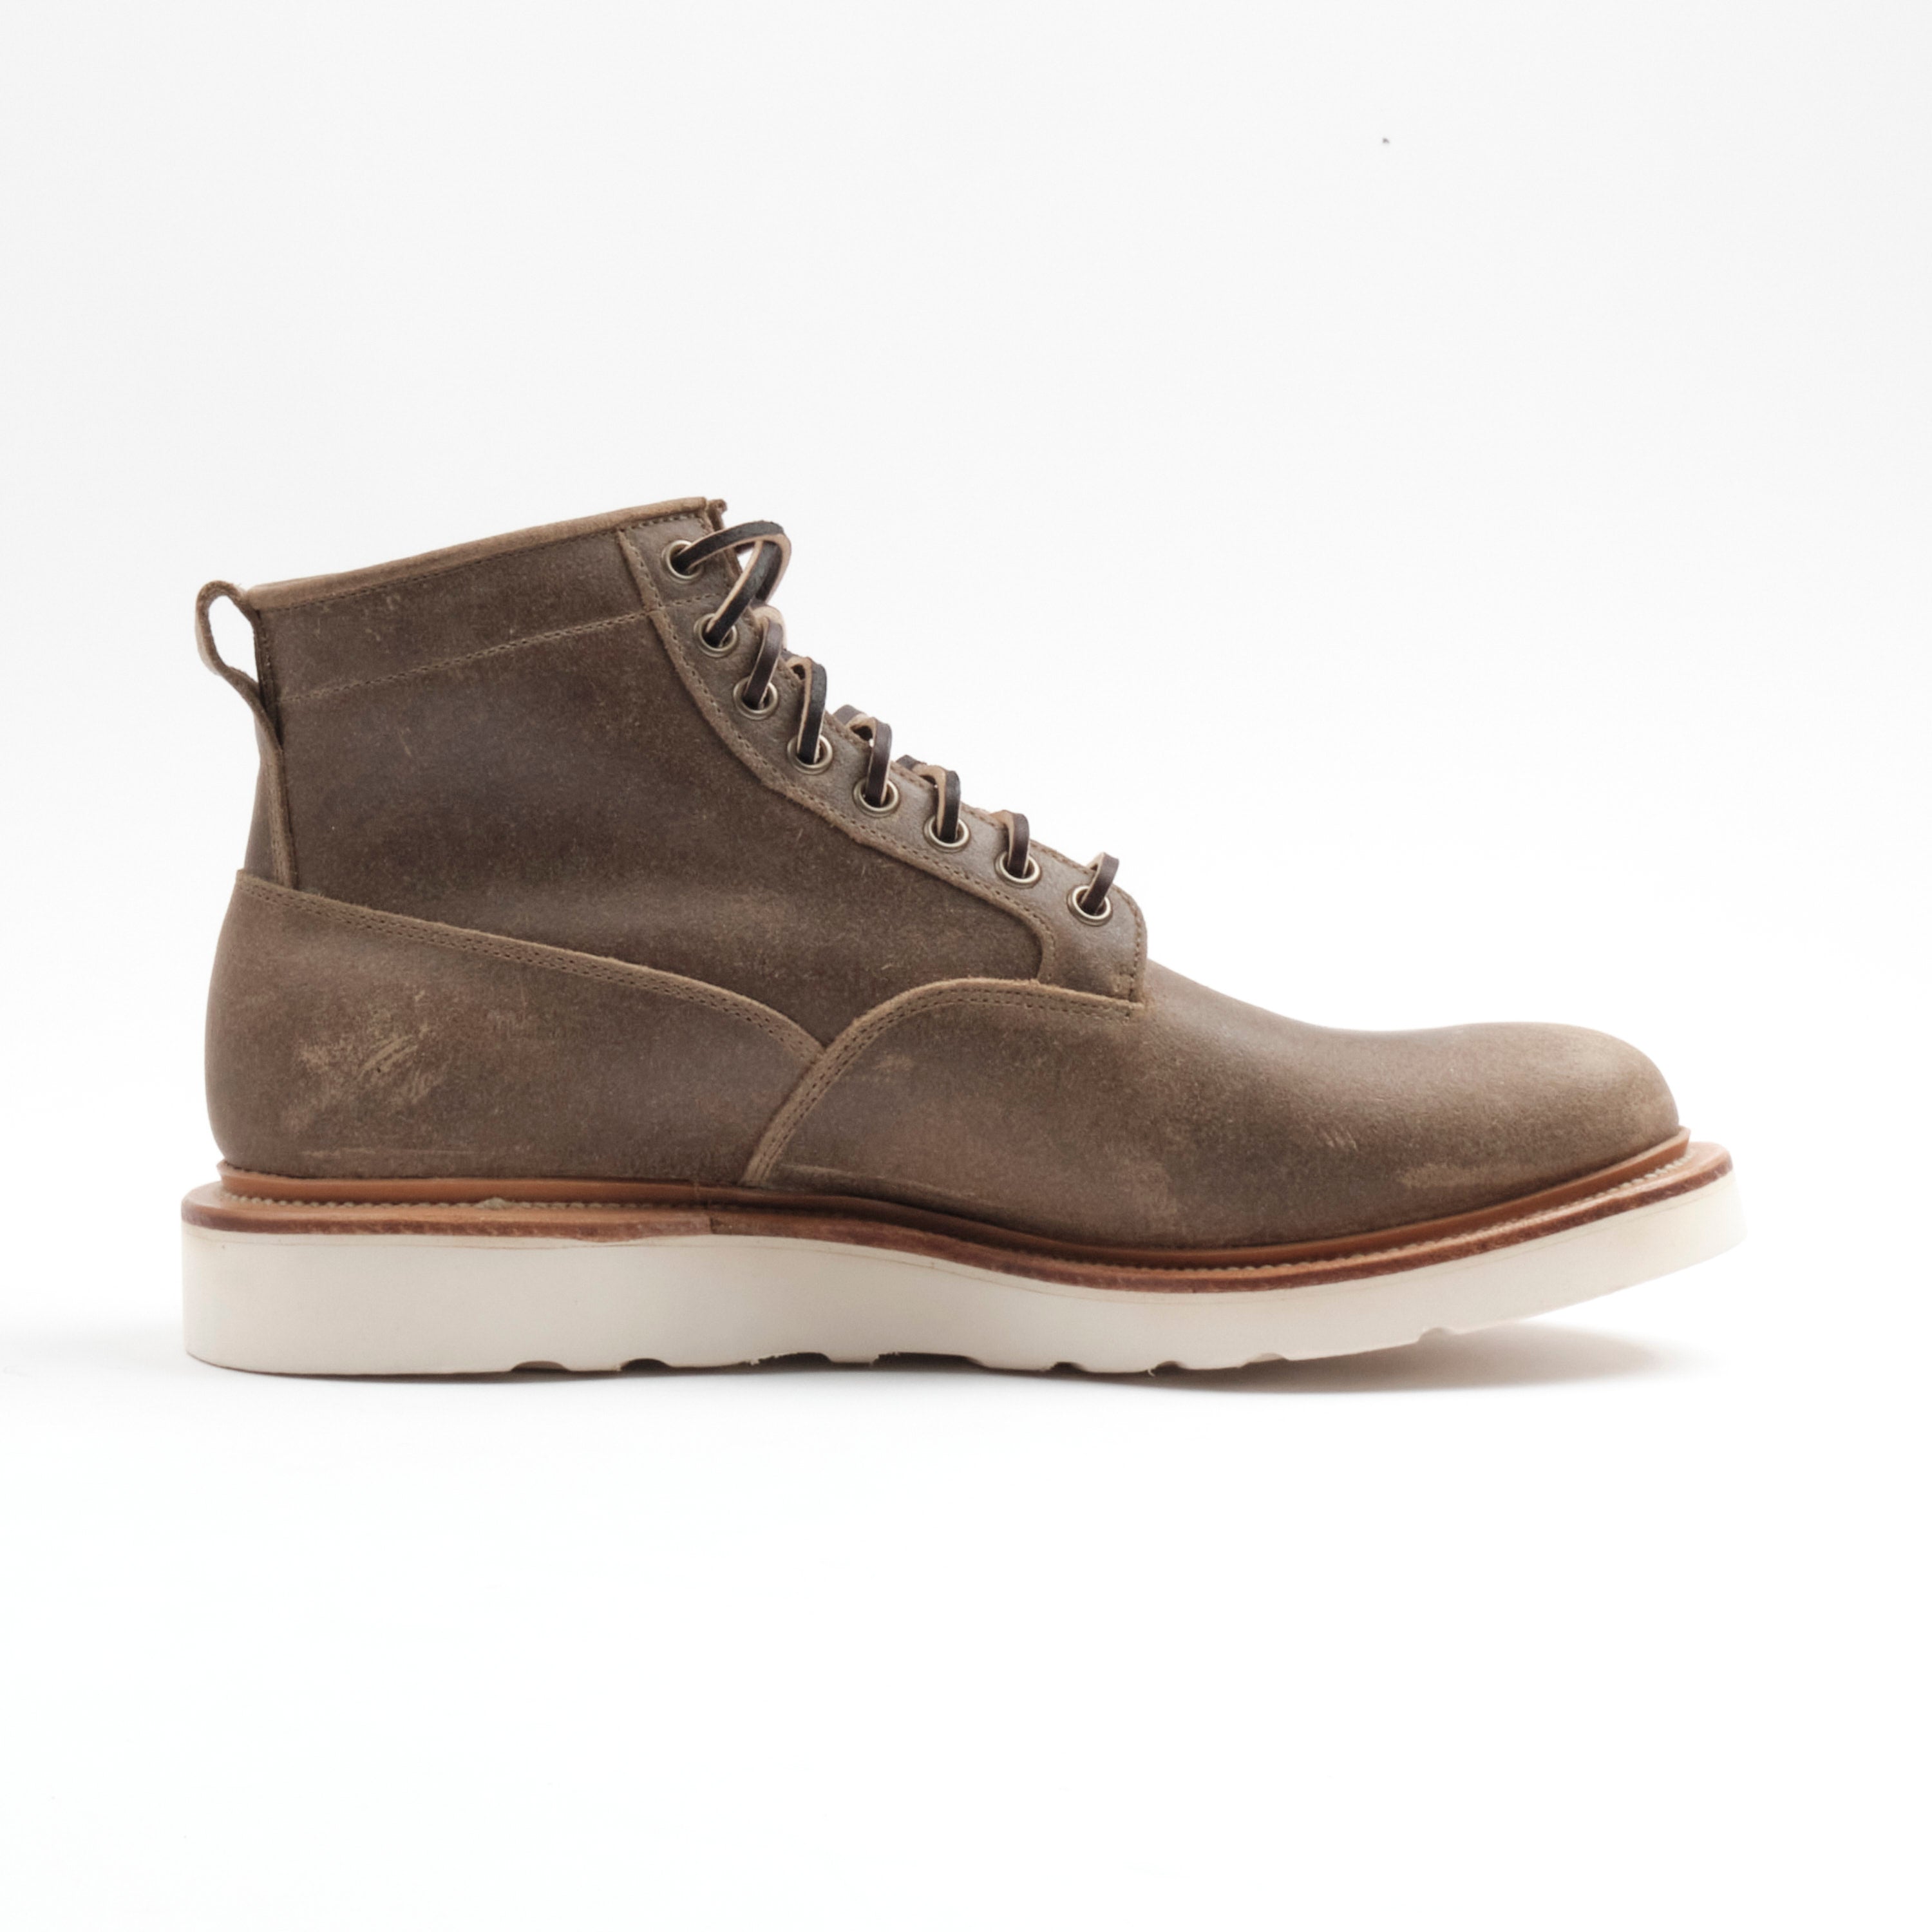 VIBERG SCOUT BOOT - NATURE WAXY COMMANDER